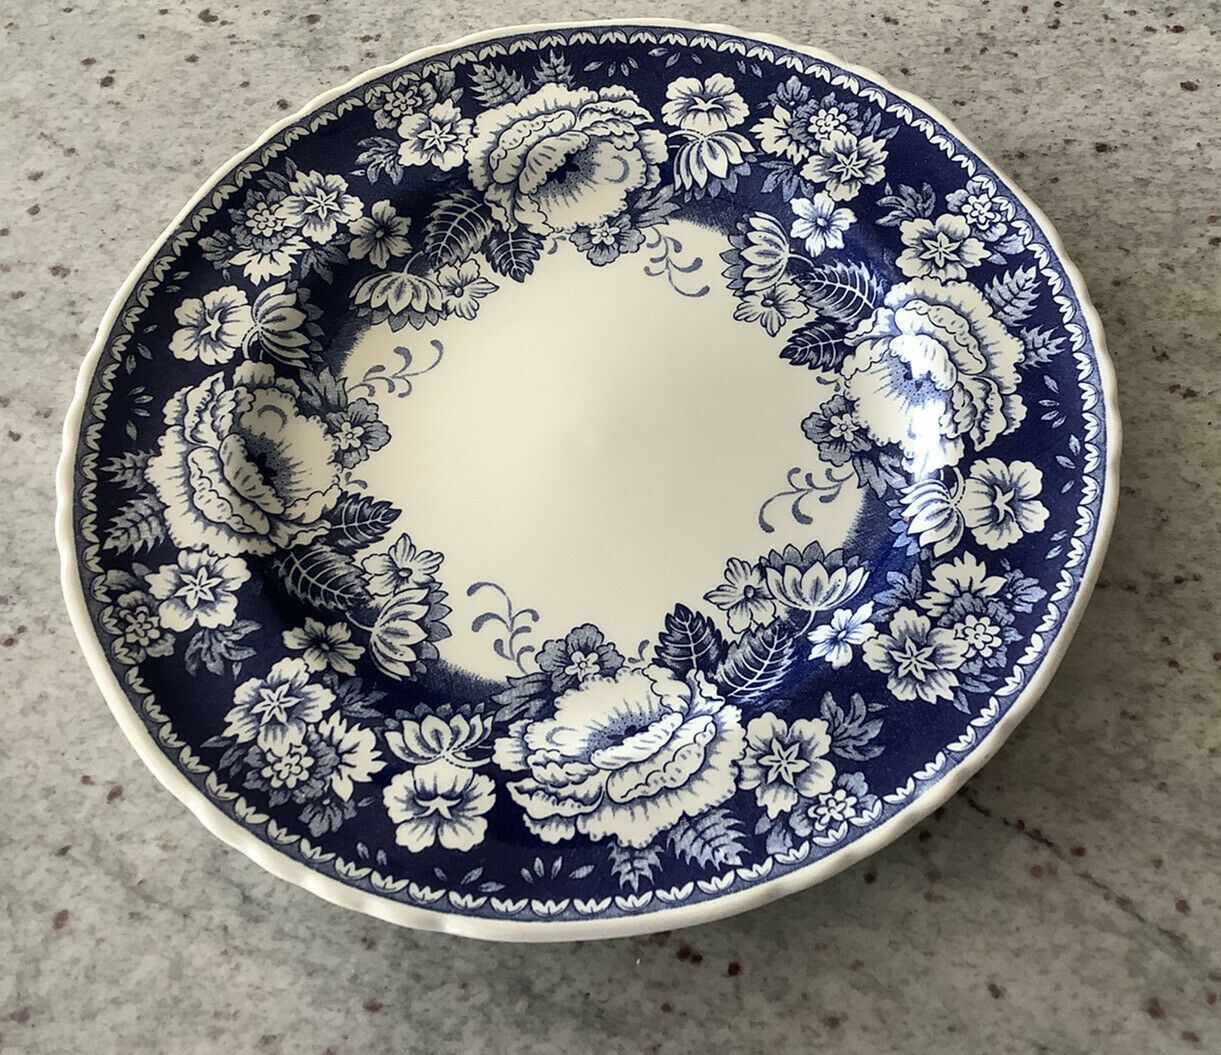 Crabtree & Evelyn Mason’s  Blue and White  Dinner Plate, London